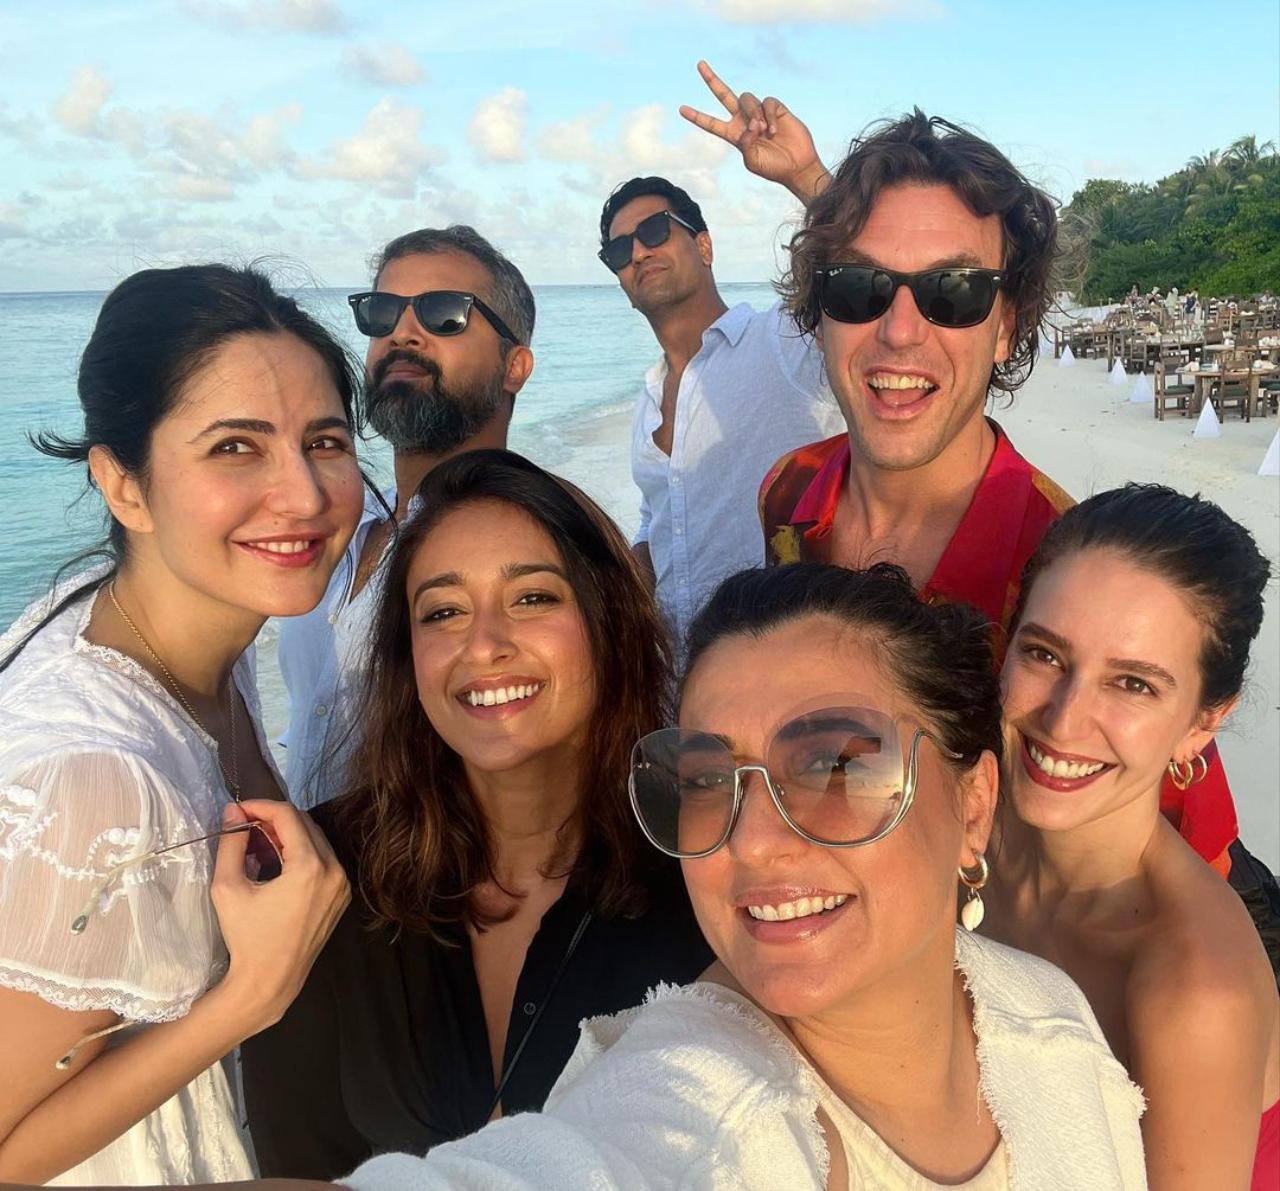 While fans were missing Vicky Kaushal in pictures shared by Katrina, Ileana dropped a picture on her Instagram handle featuring Kaushal